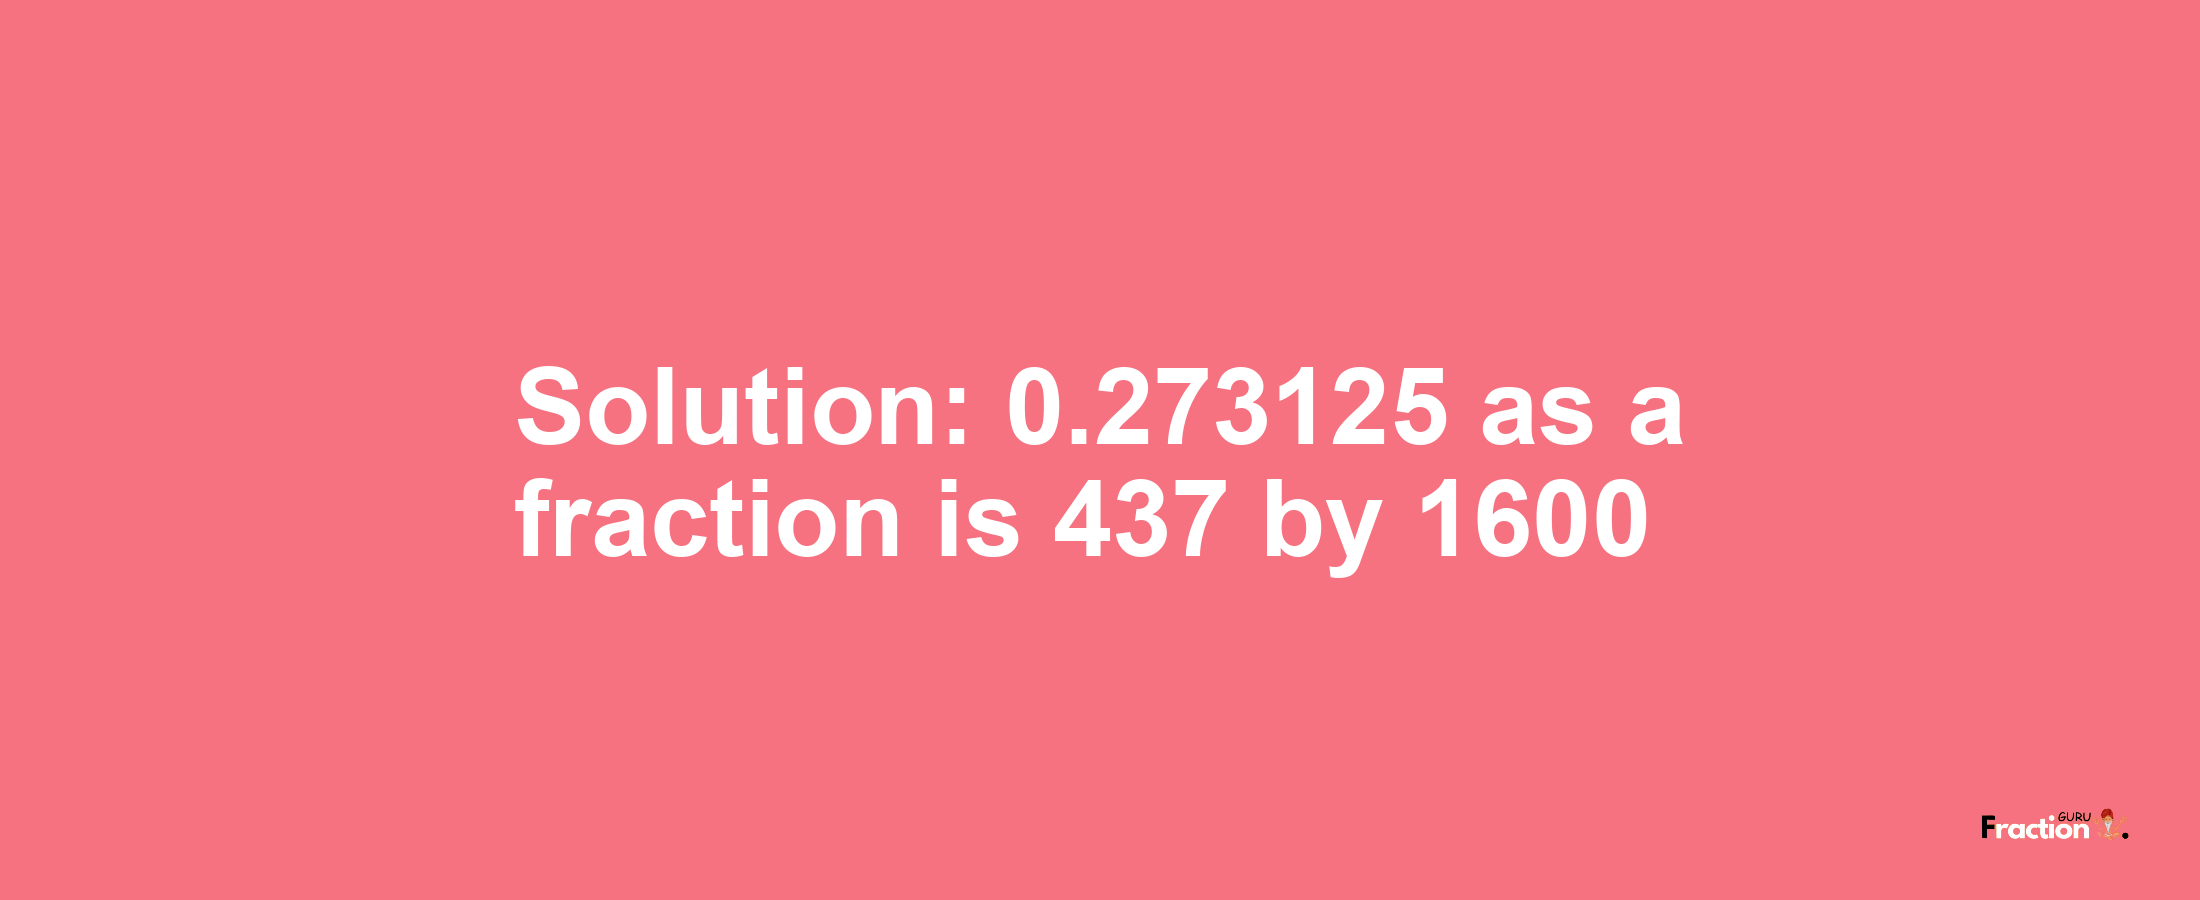 Solution:0.273125 as a fraction is 437/1600